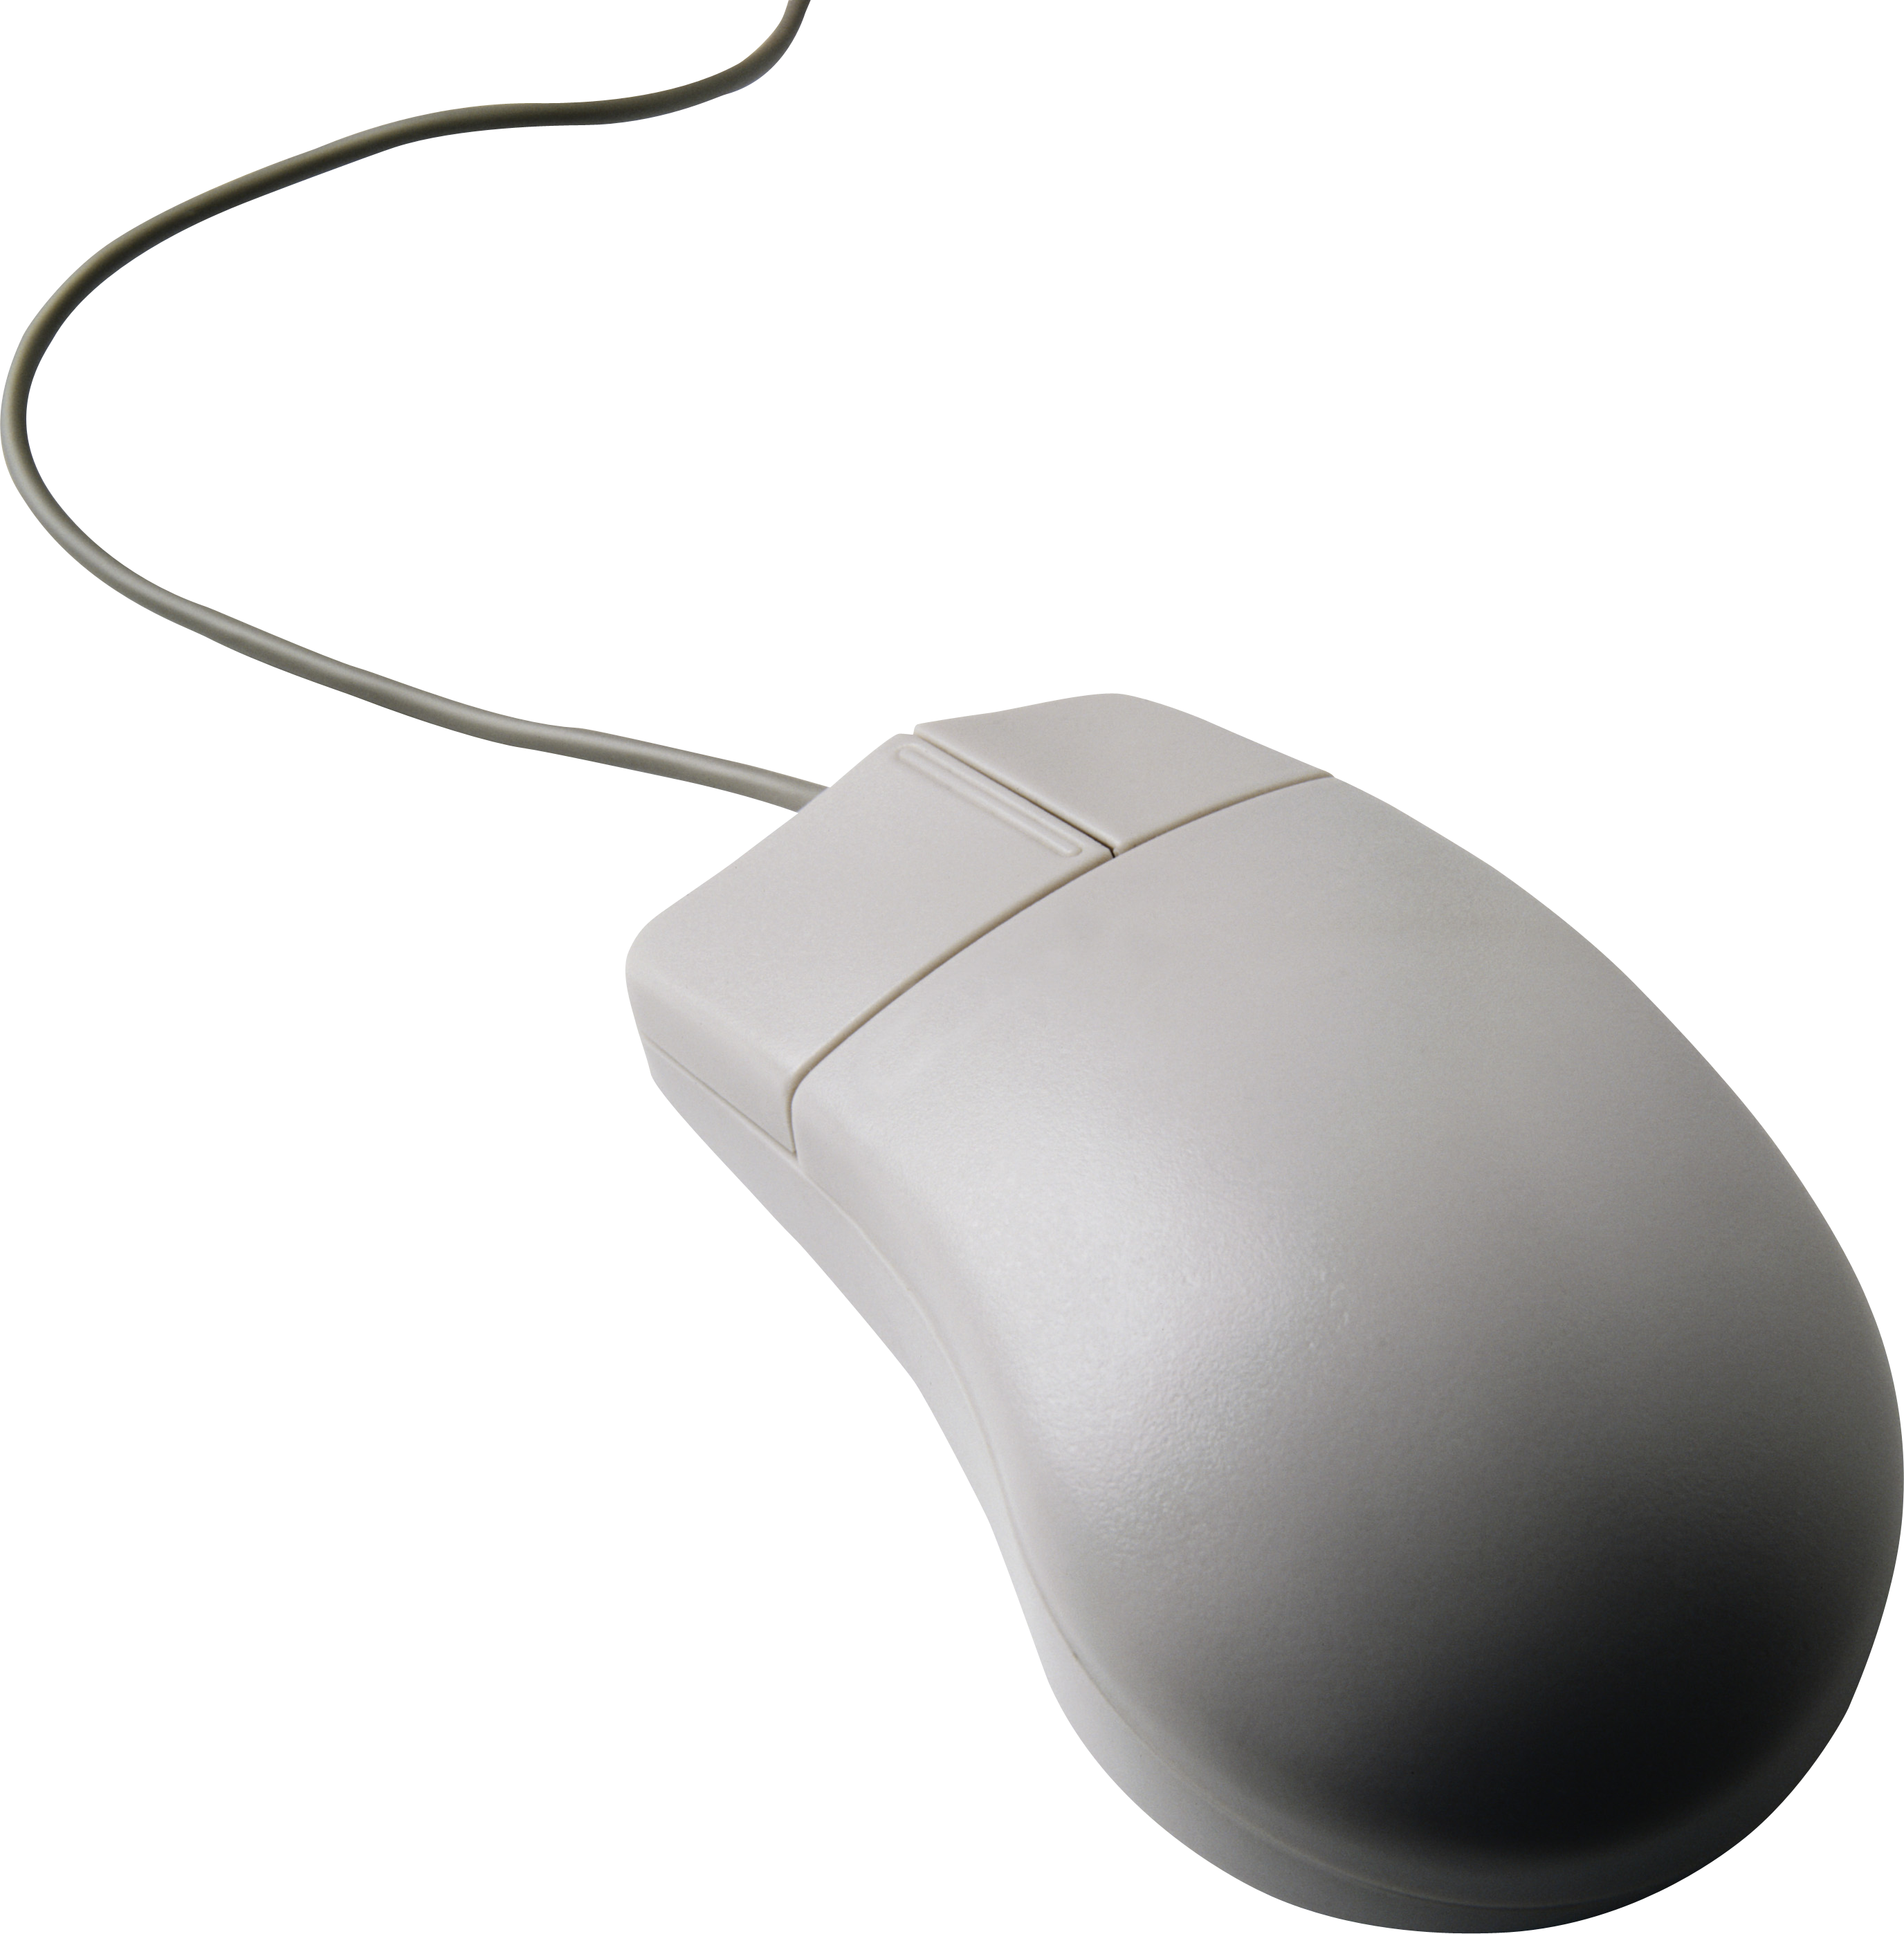 Pc Mouse PNG - 18257